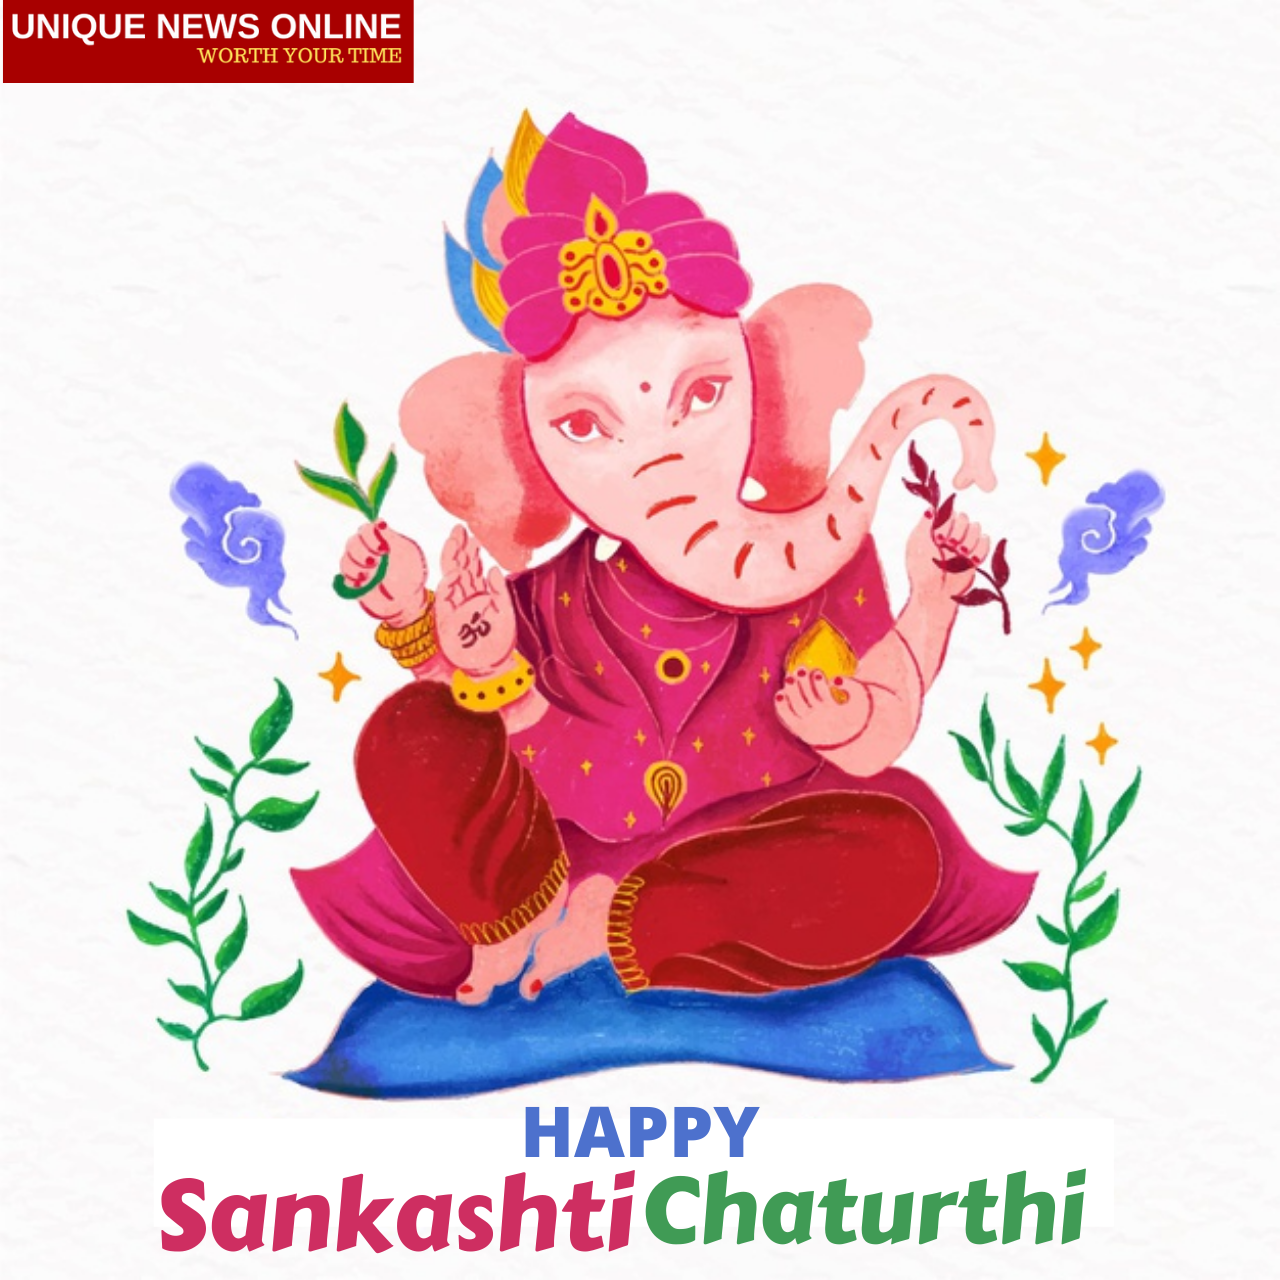 Happy Sankashti Chaturthi 2021 wishes, Status, Quotes, Messages, Greetings, and Images to share on Vinayak Chaturthi